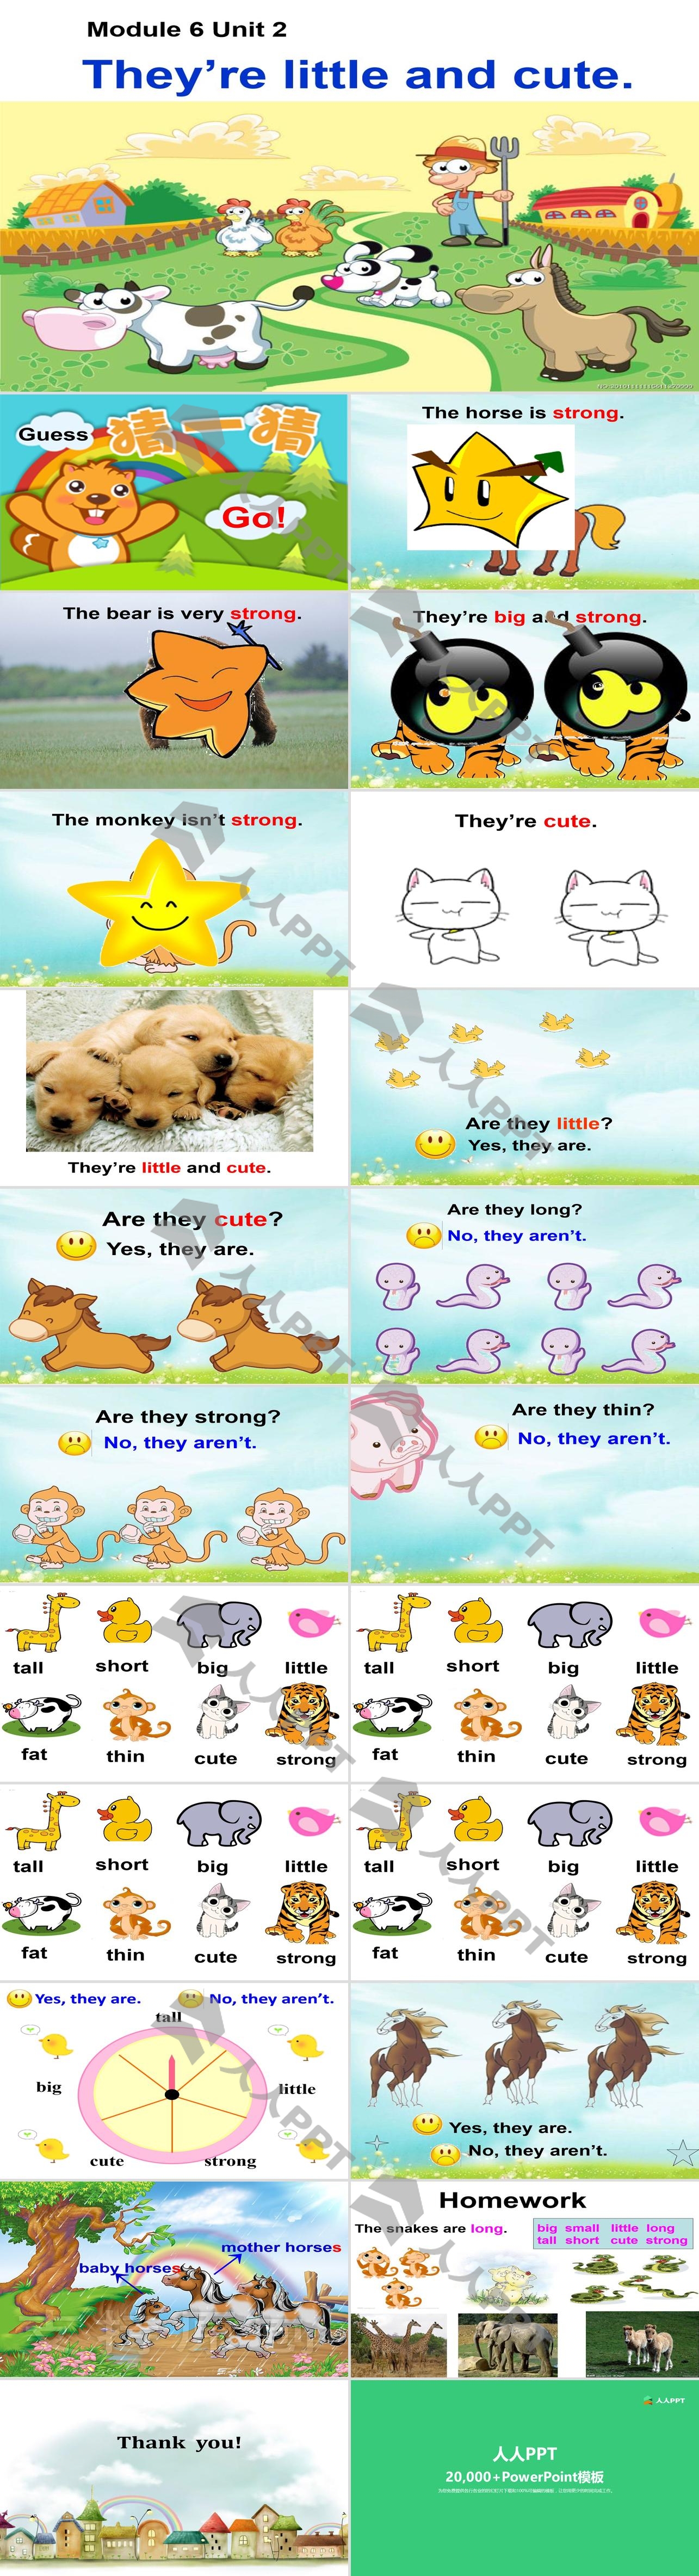 《They’re little and cute》PPT课件4长图